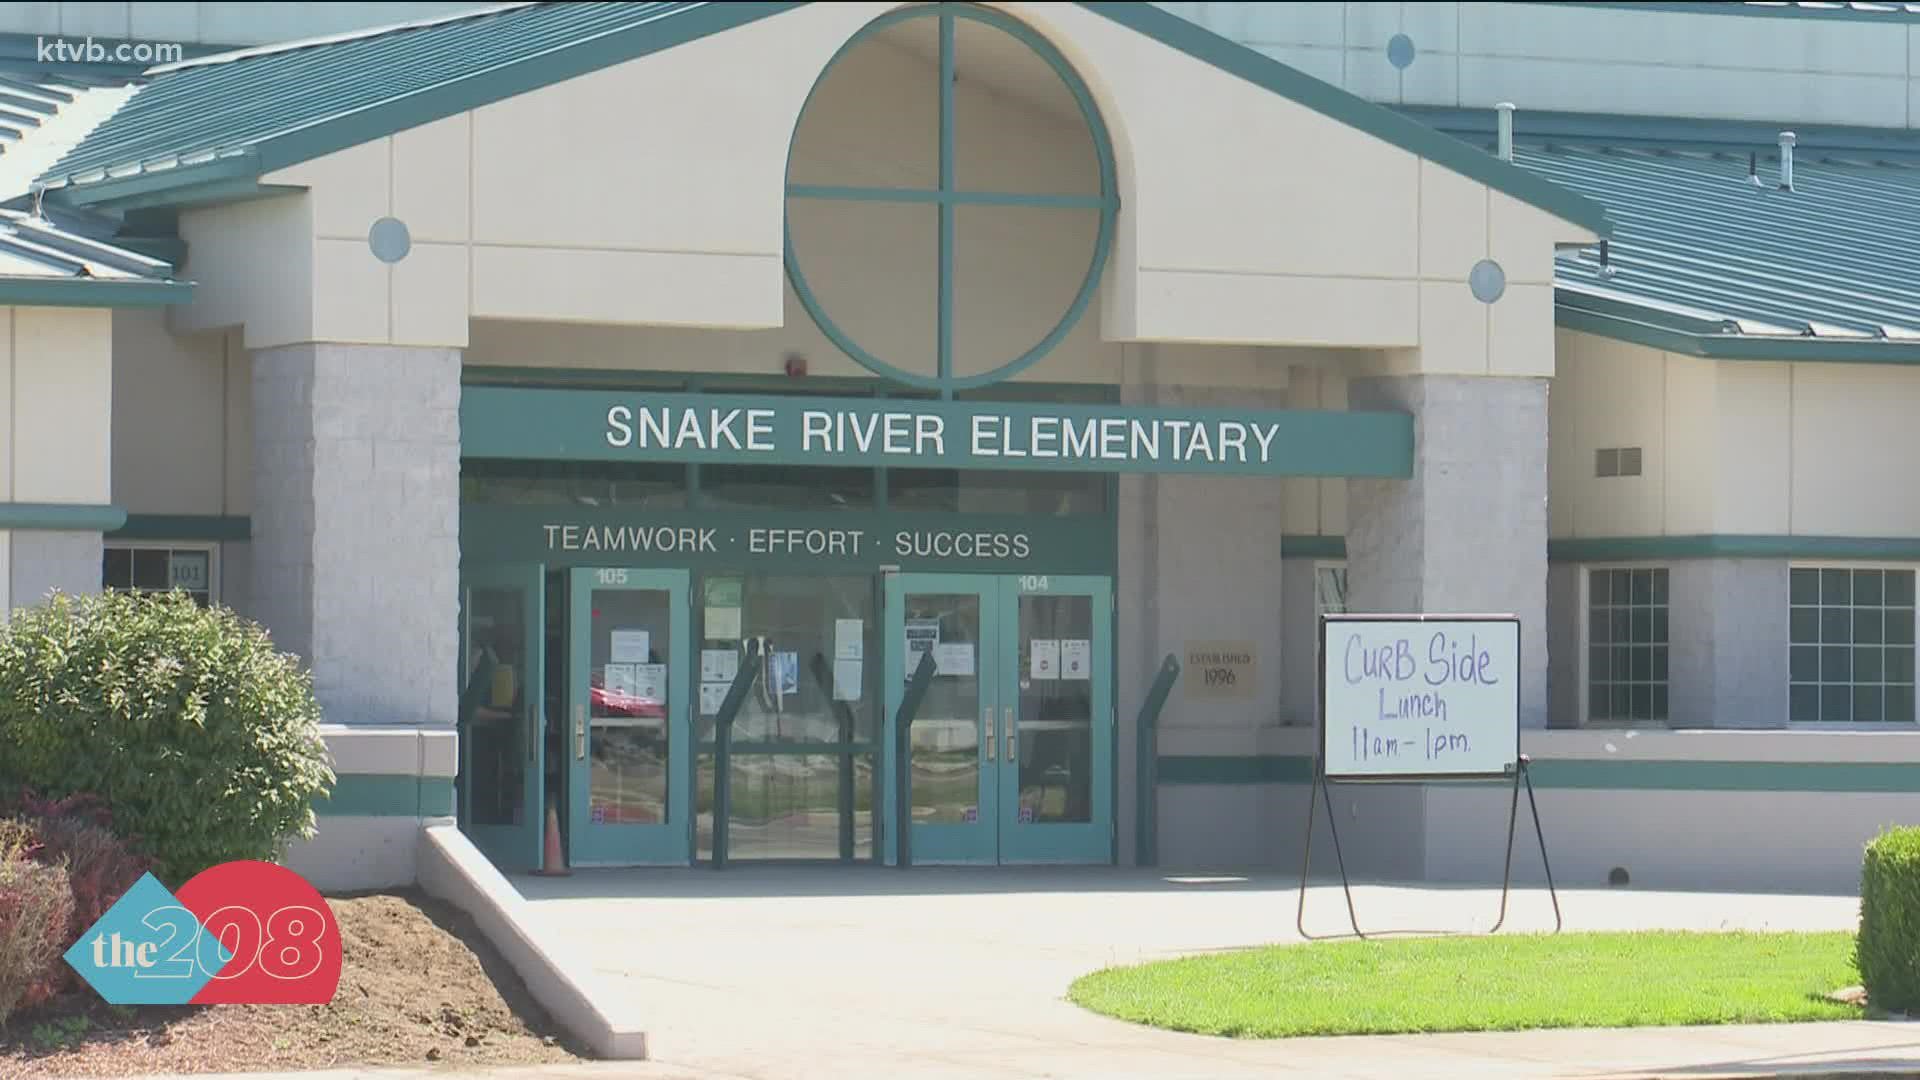 The Nampa School District says 30 percent of staff is out sick at Snake River Elementary School. And they are having trouble finding substitutes.